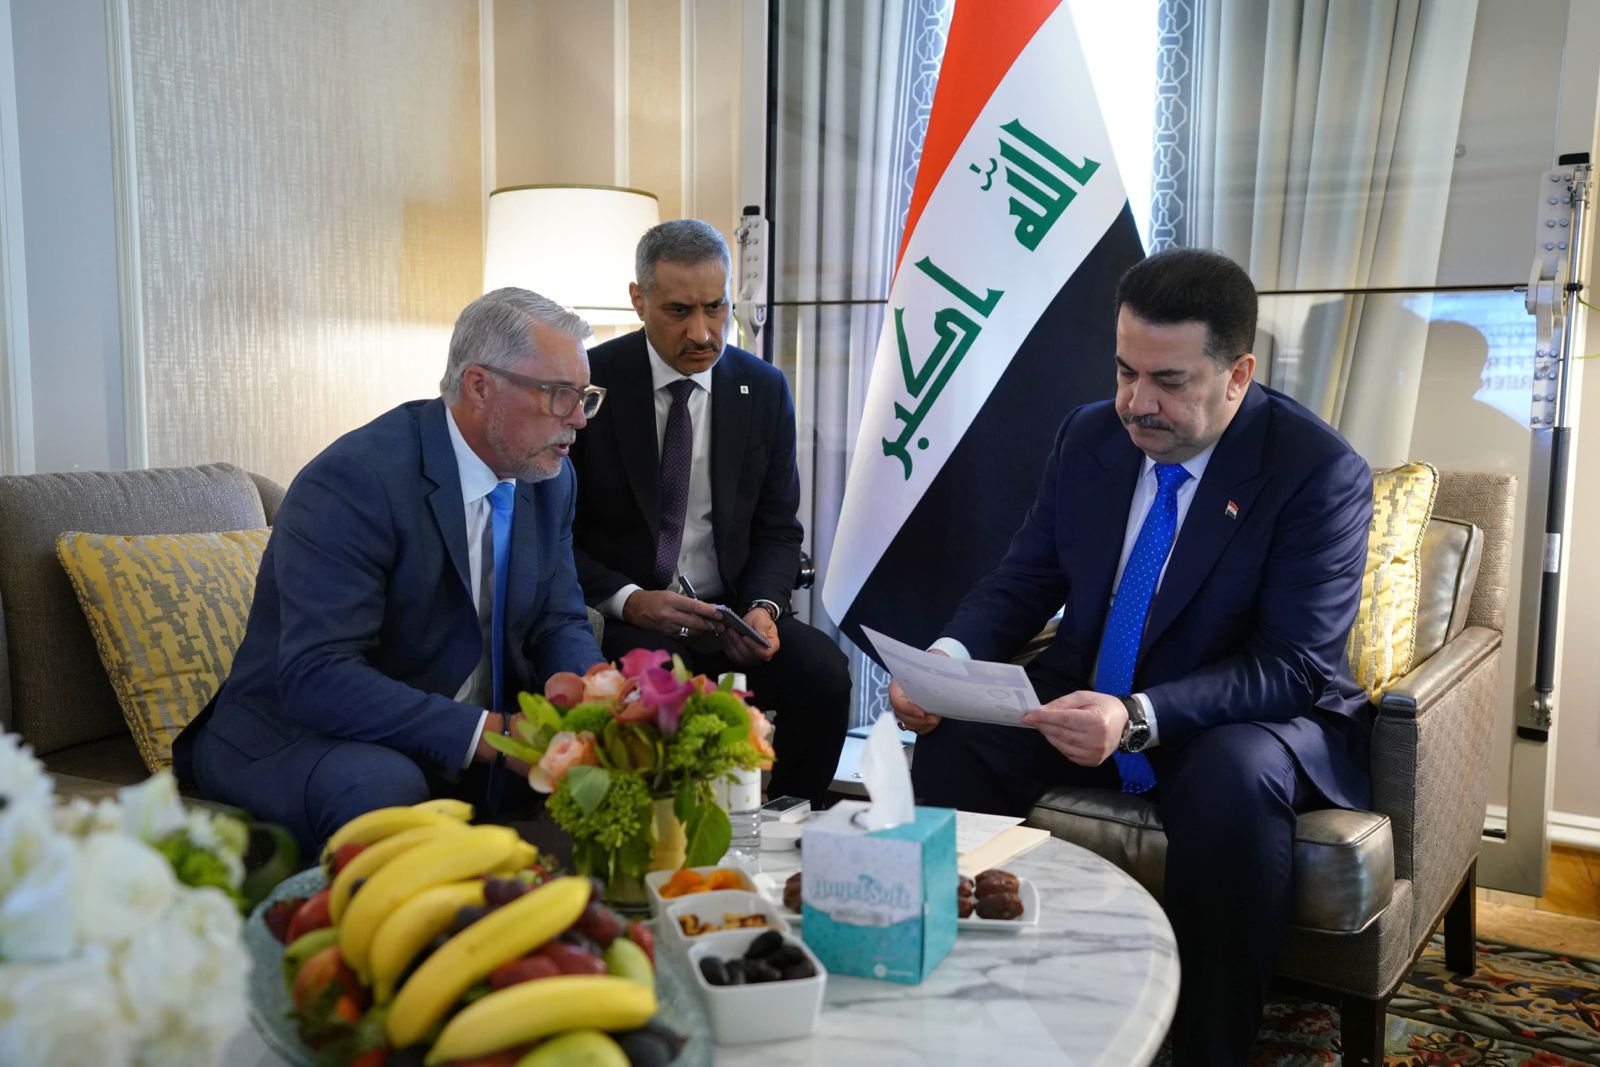 Stellar Energy pledges to Sudanese to quickly complete two electricity projects in Kirkuk and Sadr City